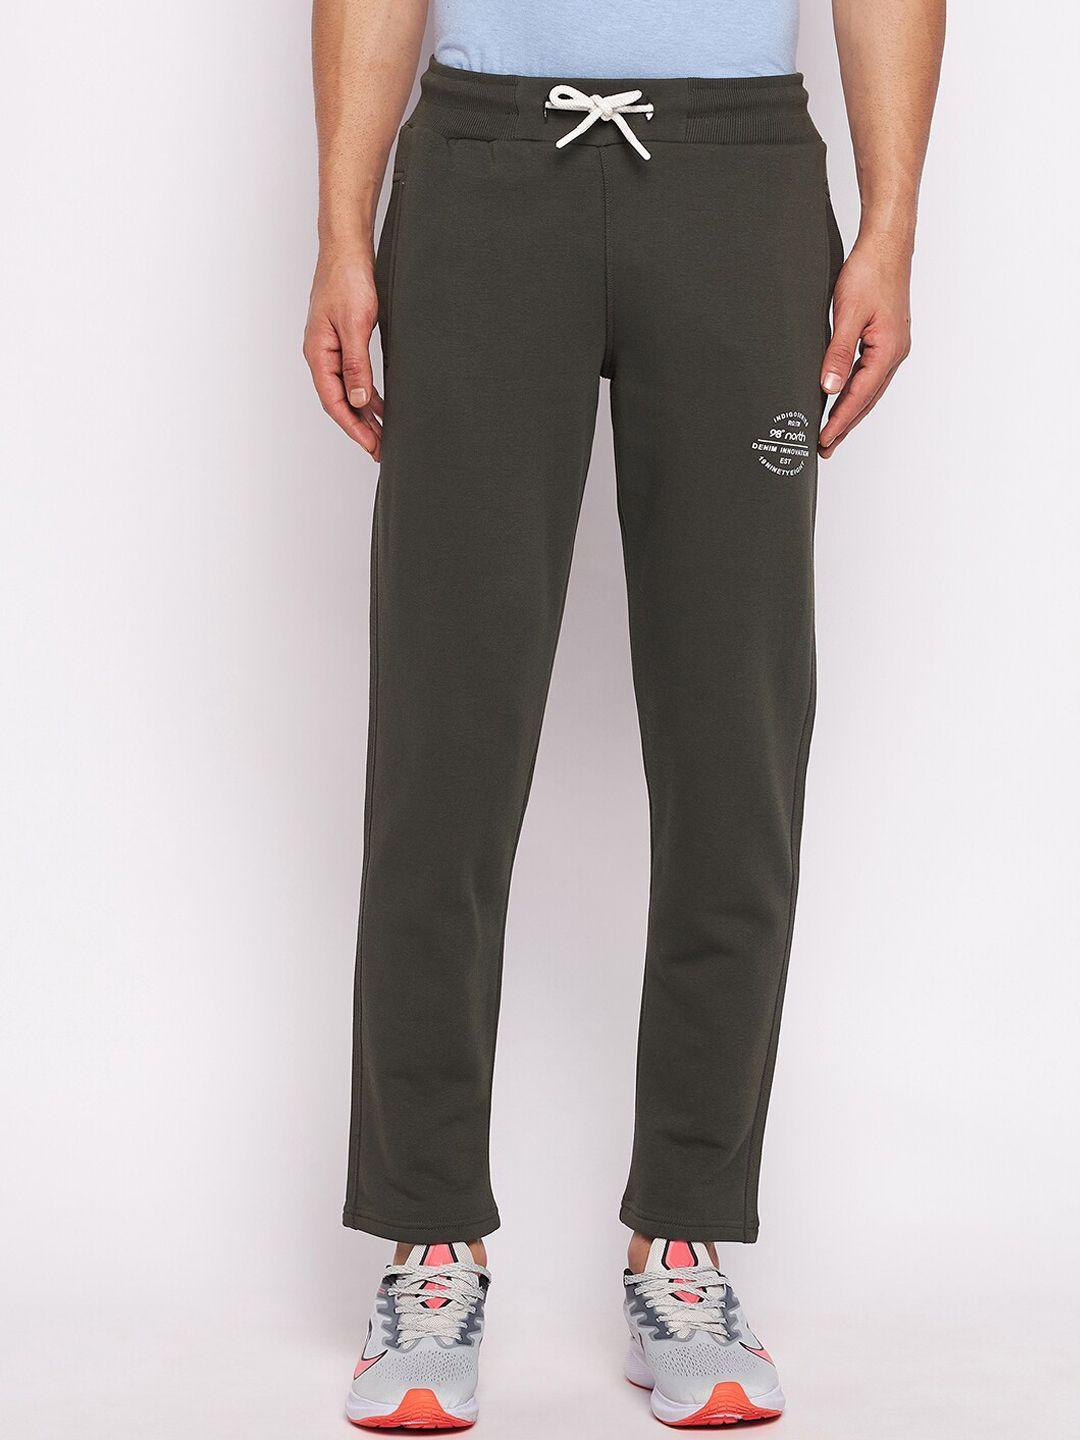 98-degree-north-men-olive-solid-cotton-track-pant